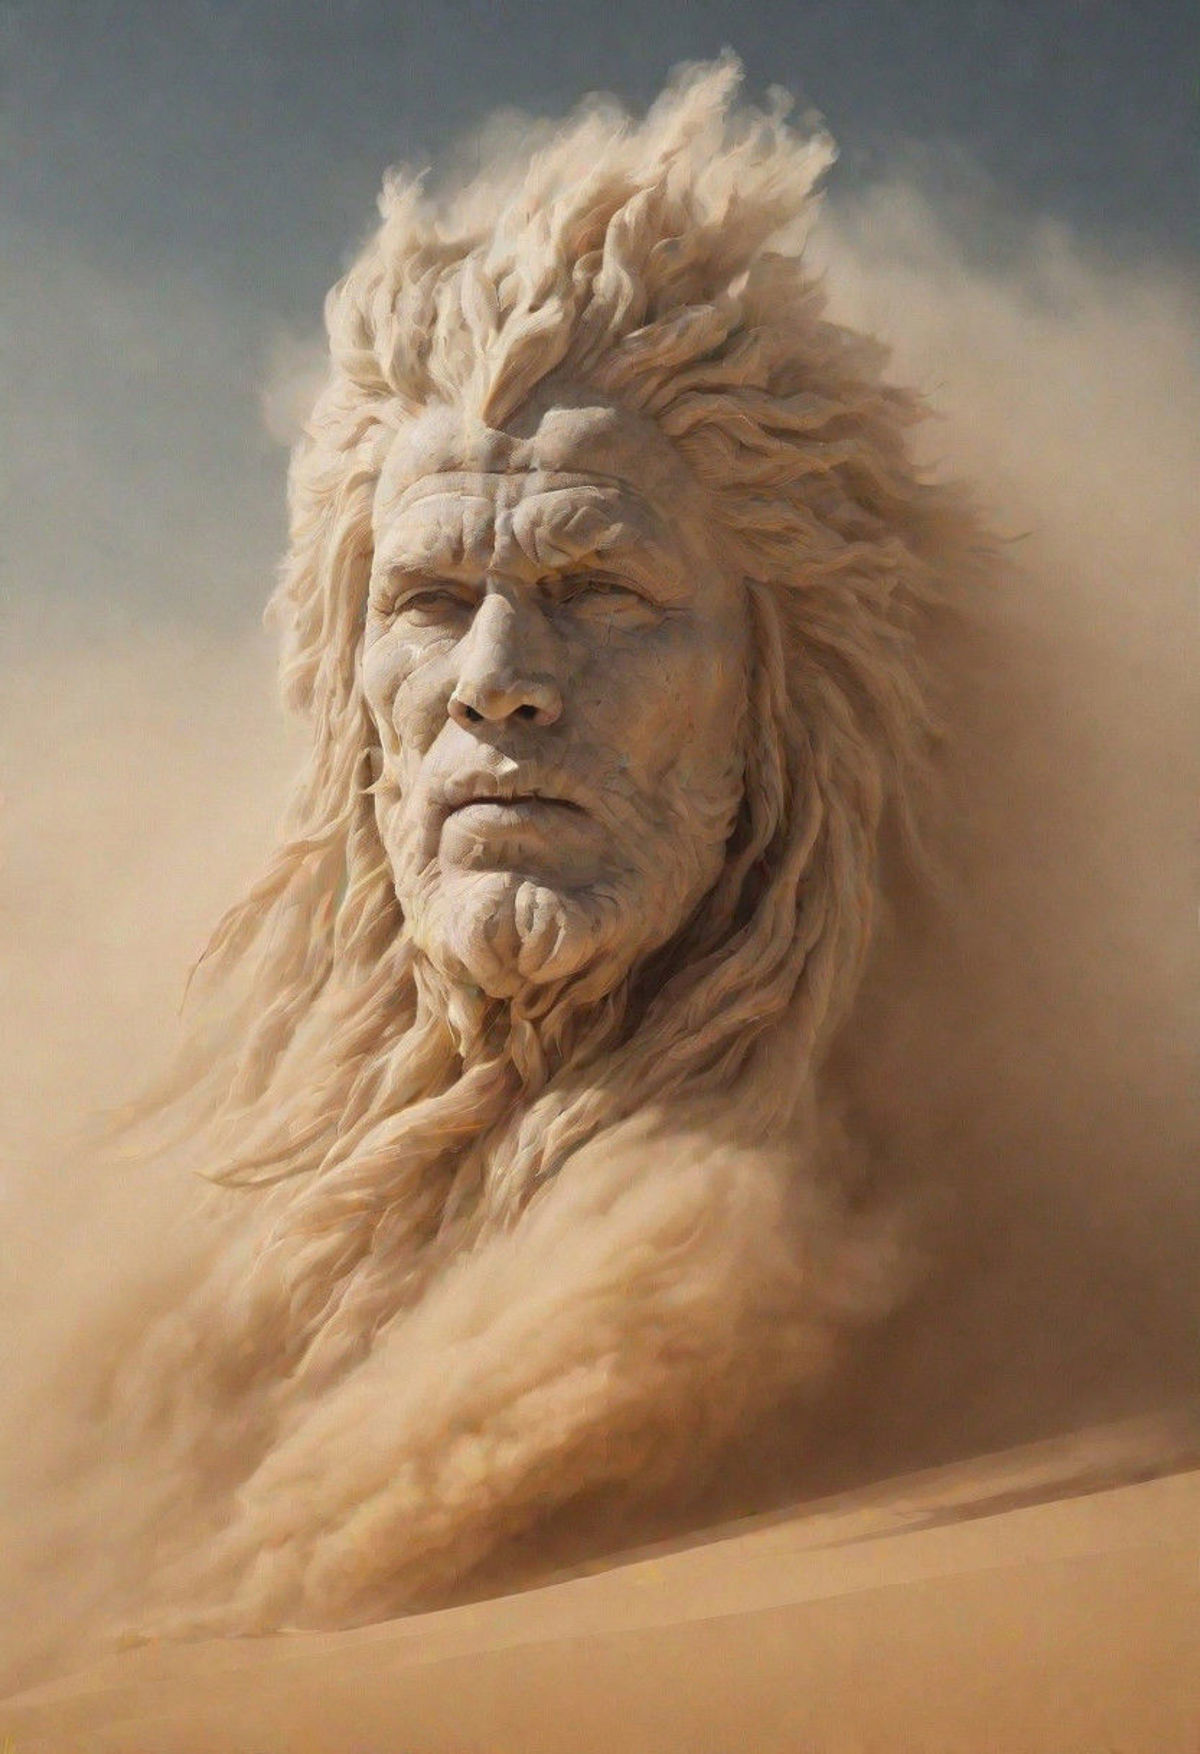 A sand sculpture of a man with long hair and a beard, looking serious.